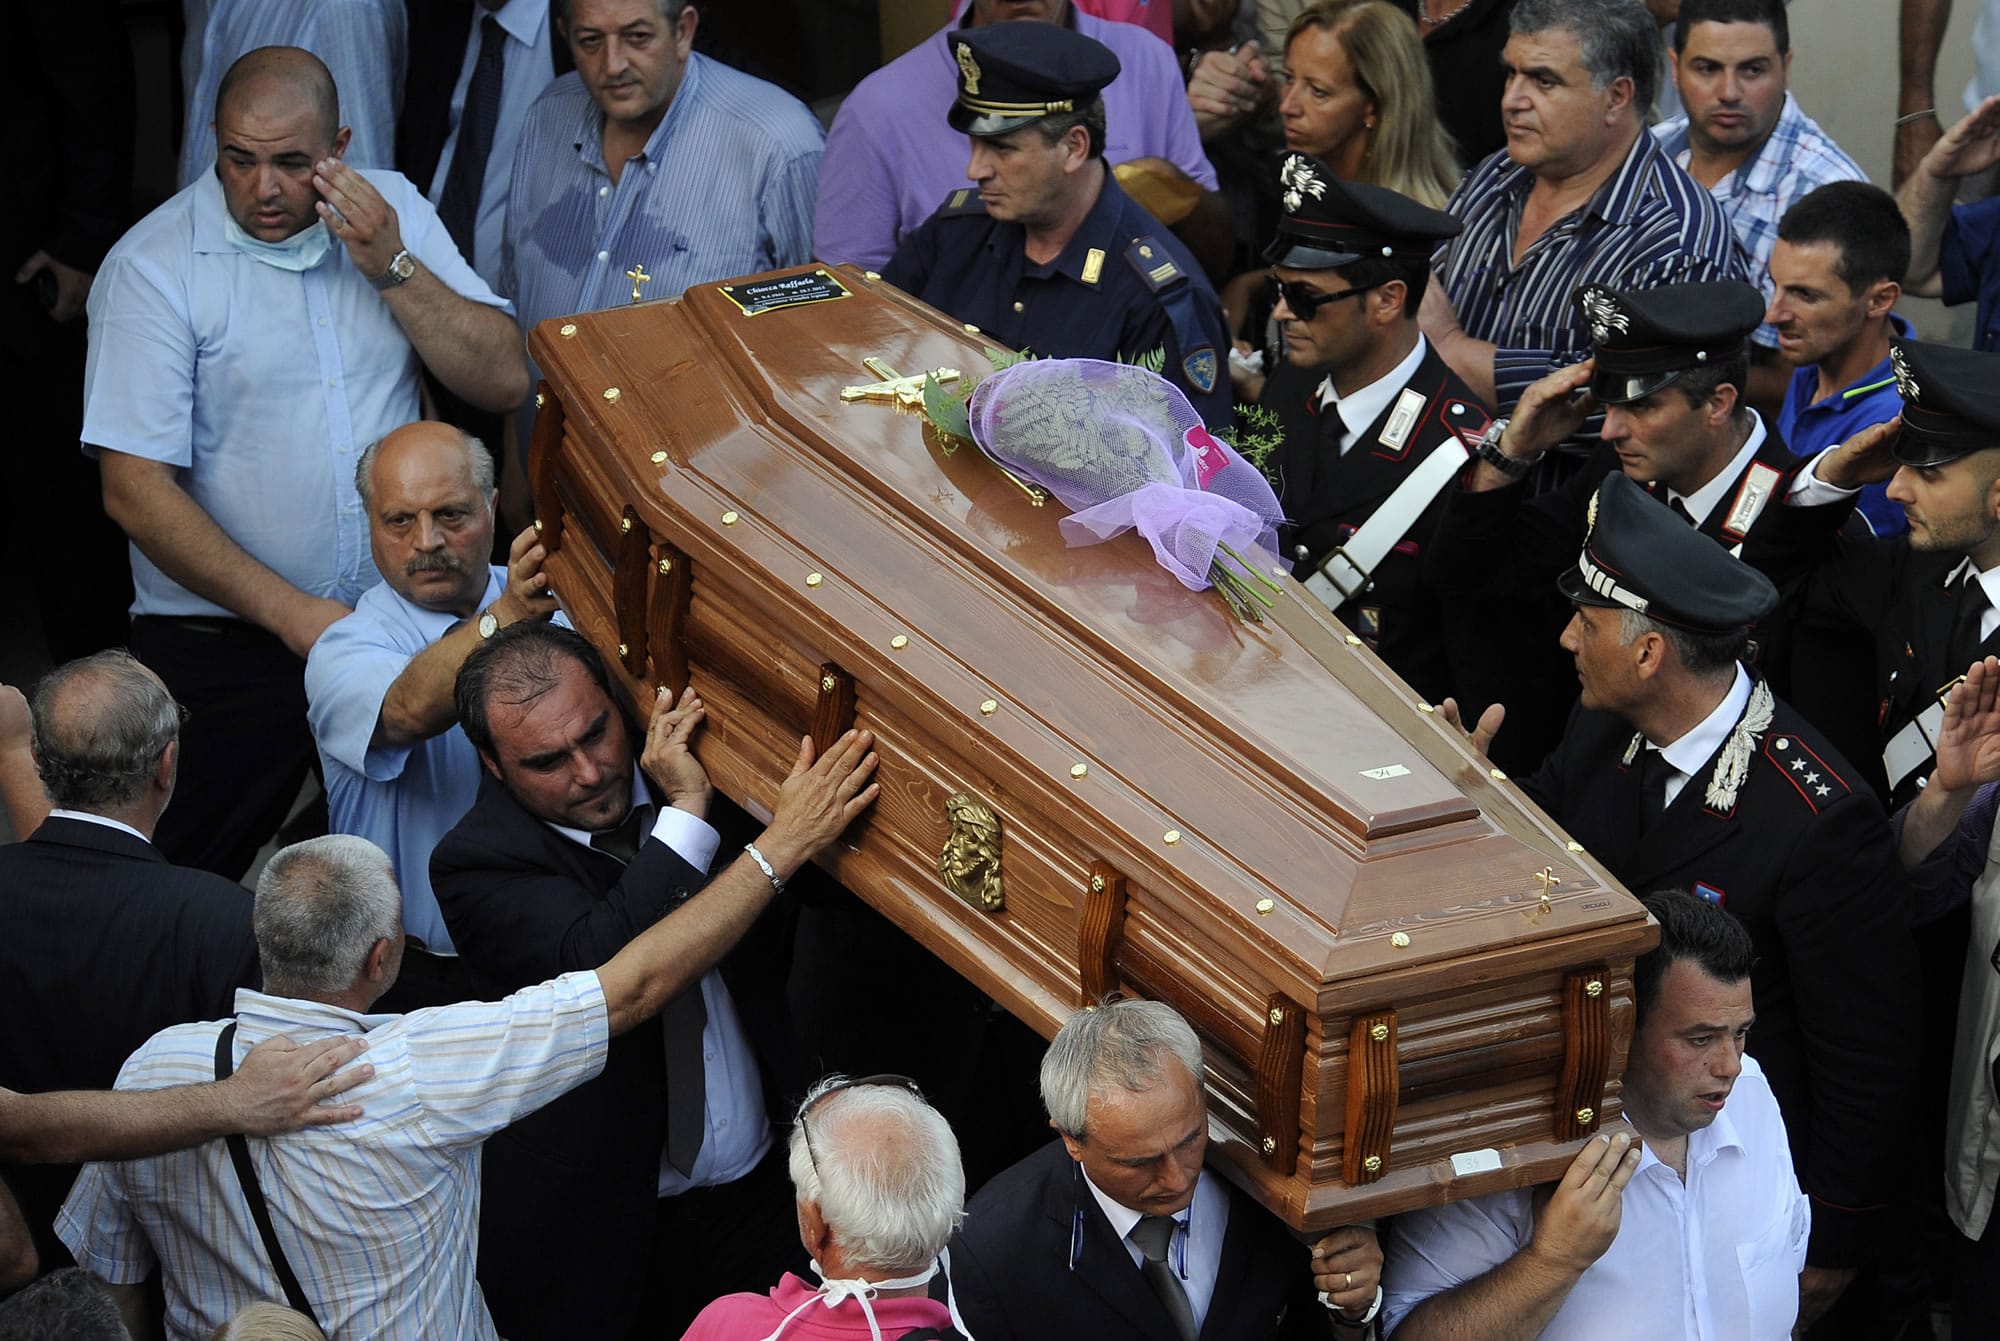 The coffin with one of the victims is carried away from a facility of an elementary school turned into a morgue in Monteforte Irpino, southern Italy, on Monday.